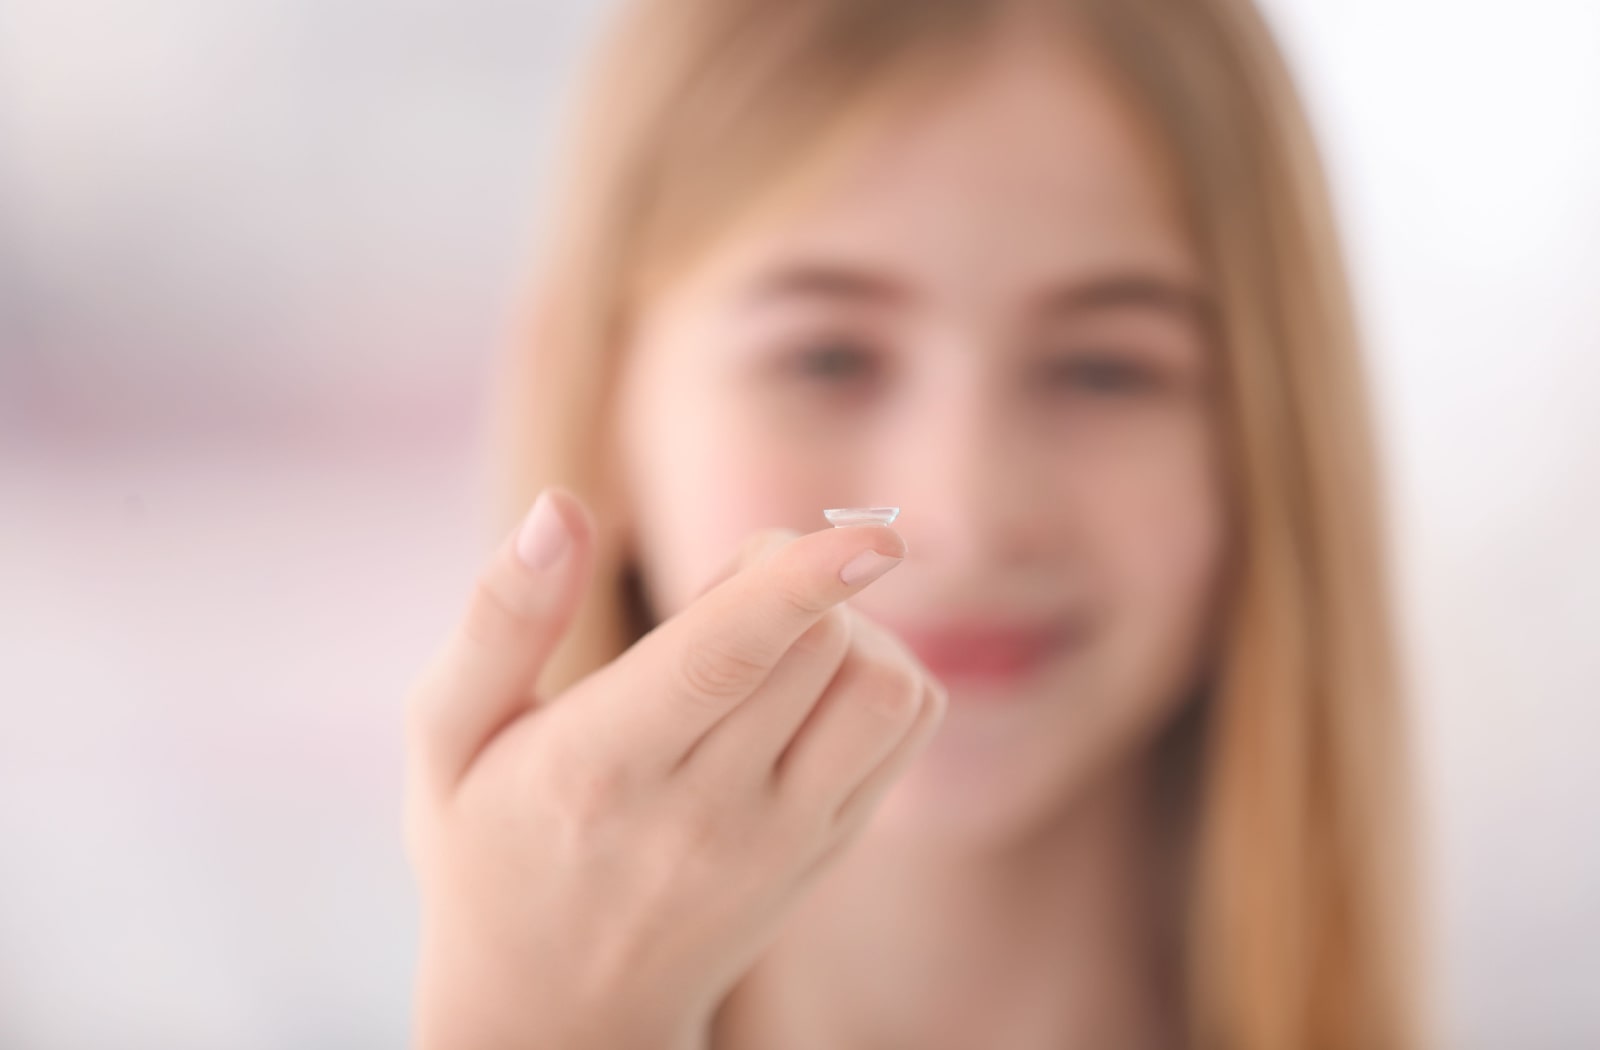  A teenage girl holding onto a contact lens on her index finger.